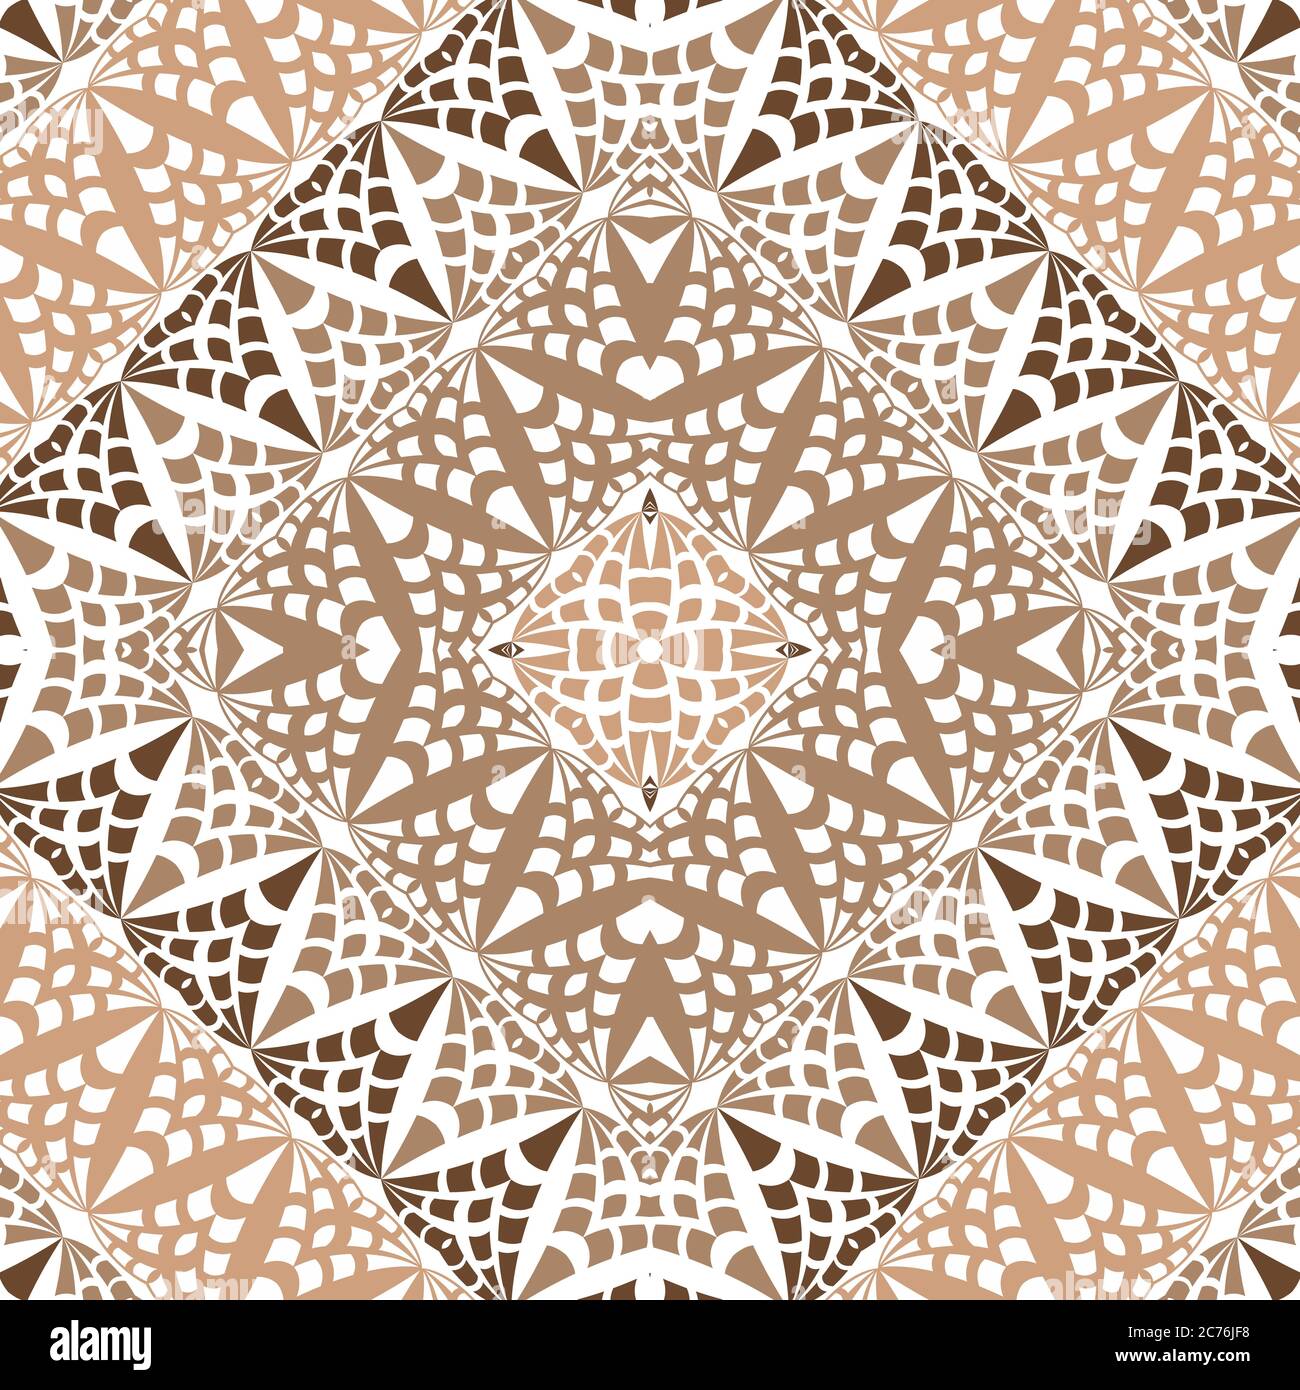 Vector abstract lace hand drawn seamless pattern Stock Vector